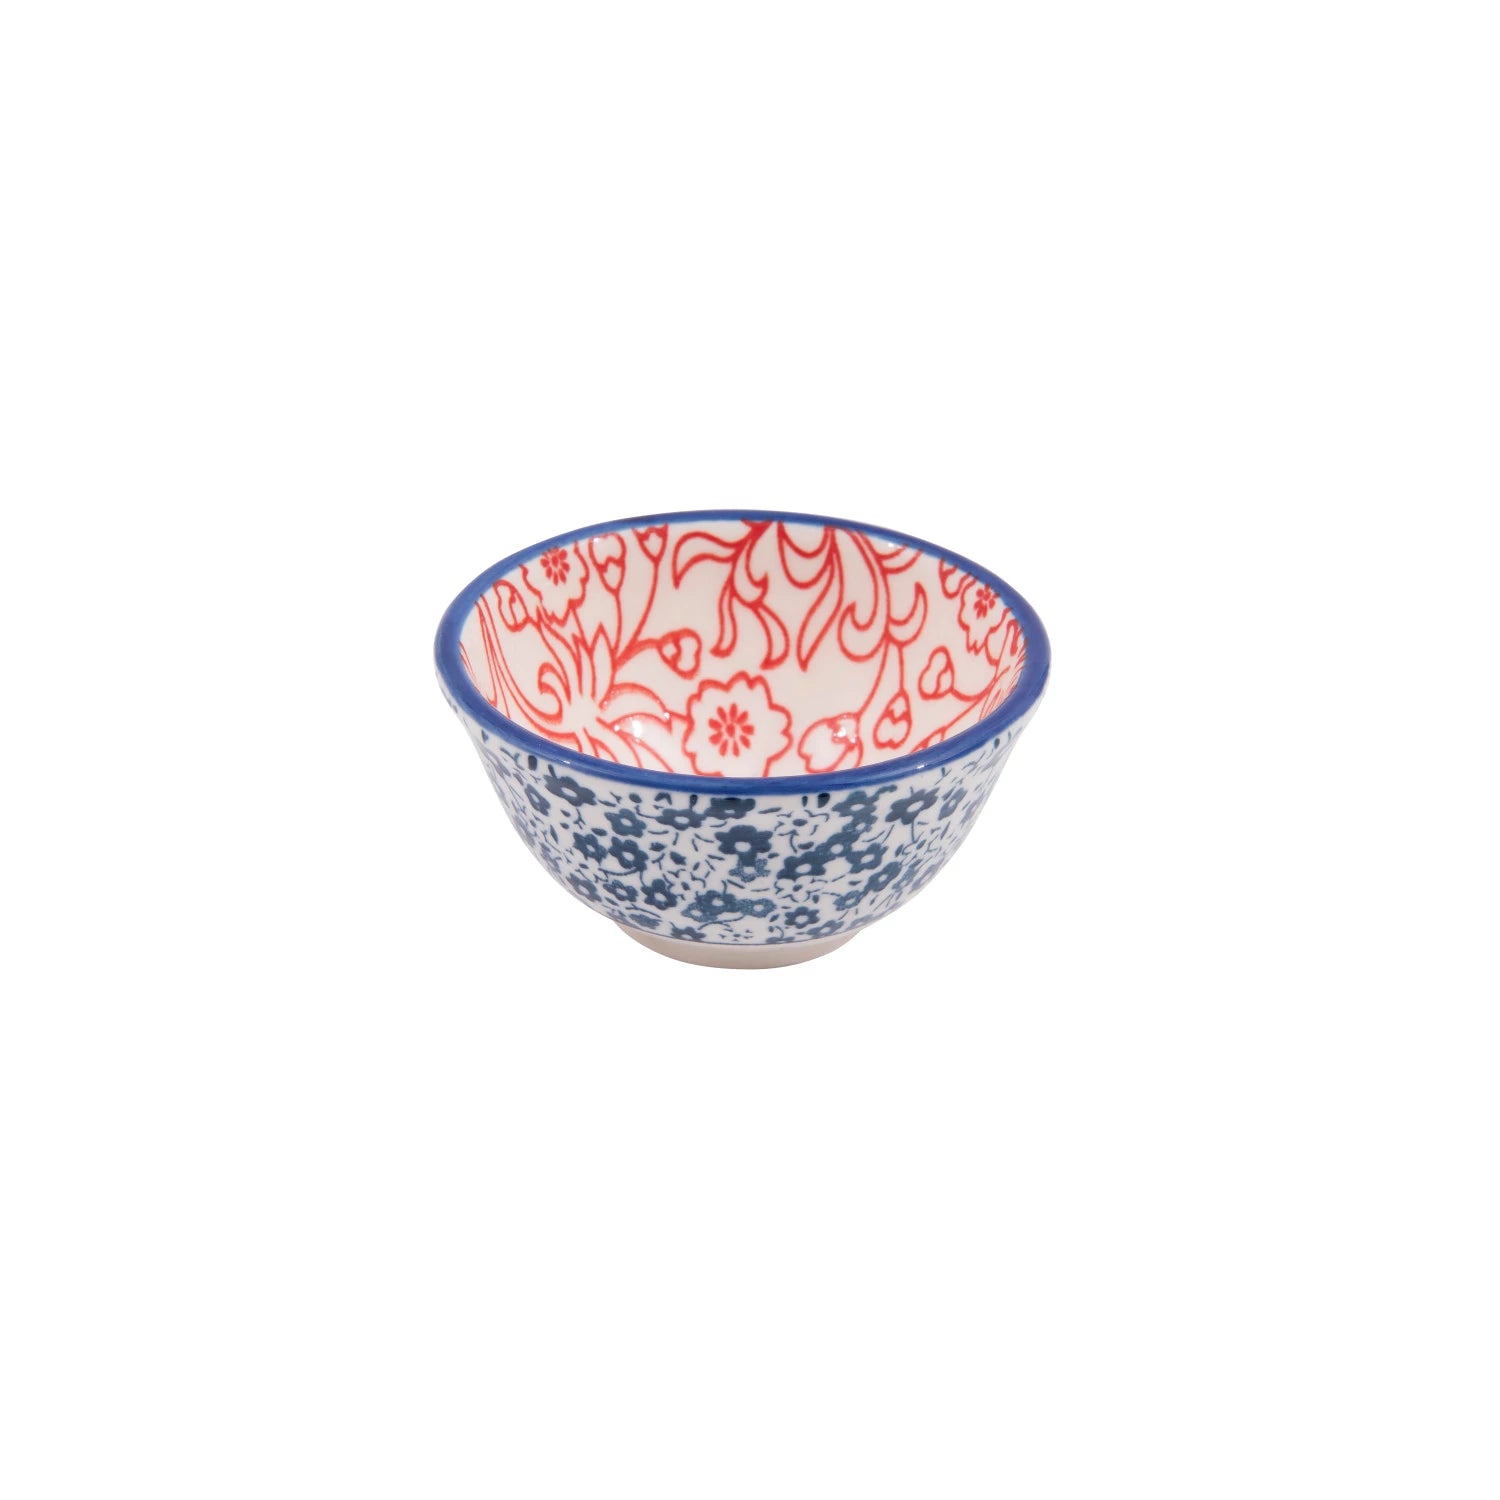 pinch bowl wirh blue floral pattern outside and red floral pattern inside.